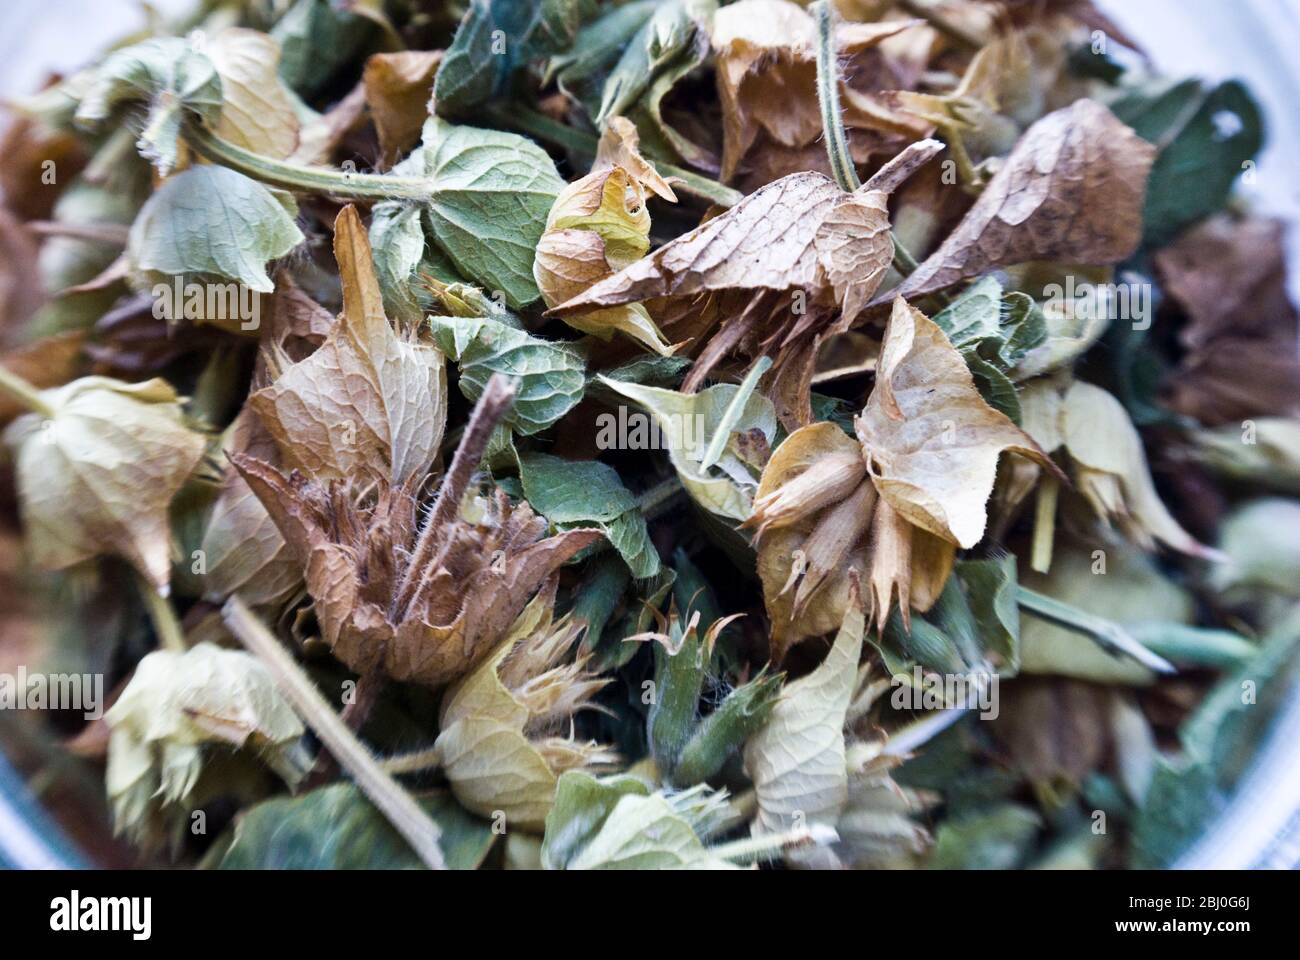 Dried linden flowers for herbal tea or tisane - Stock Photo